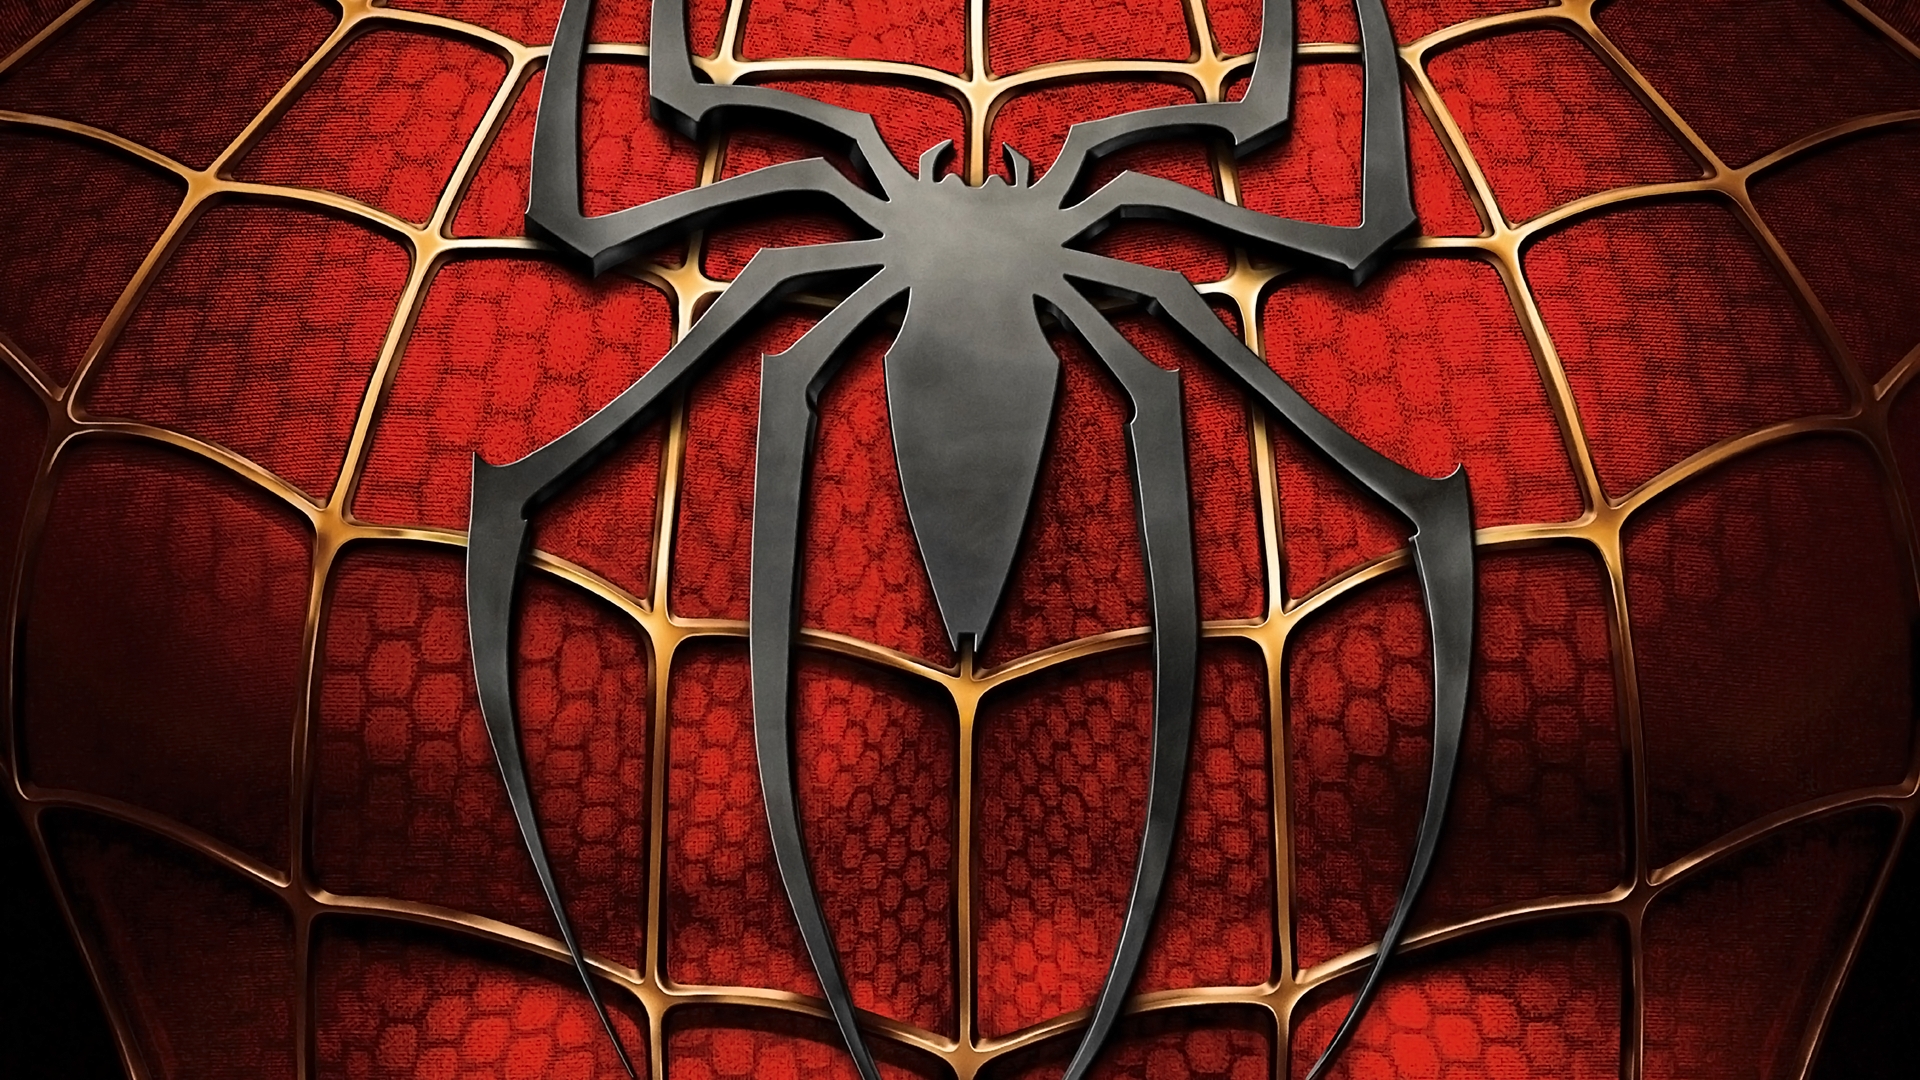 Spiderman Wallpaper for PC | Full HD Pictures